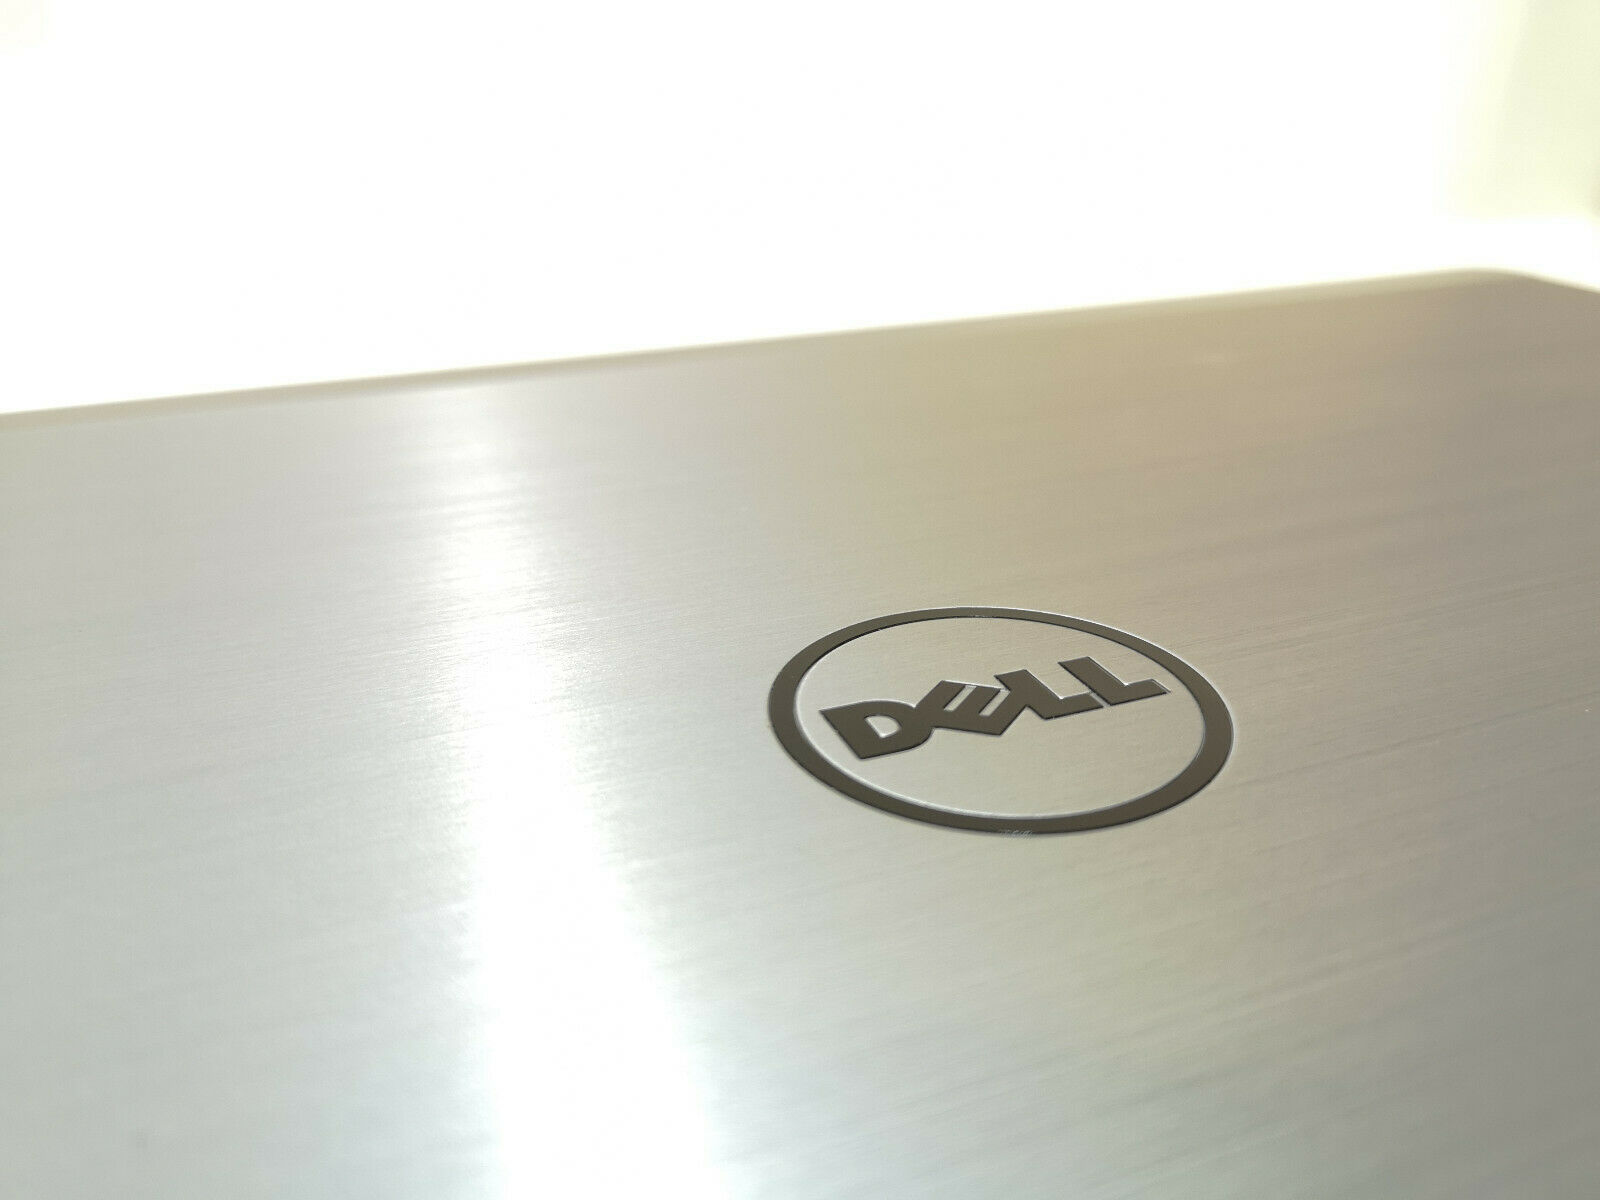 Refurbished Dell Inspiron 5749 Laptop PC